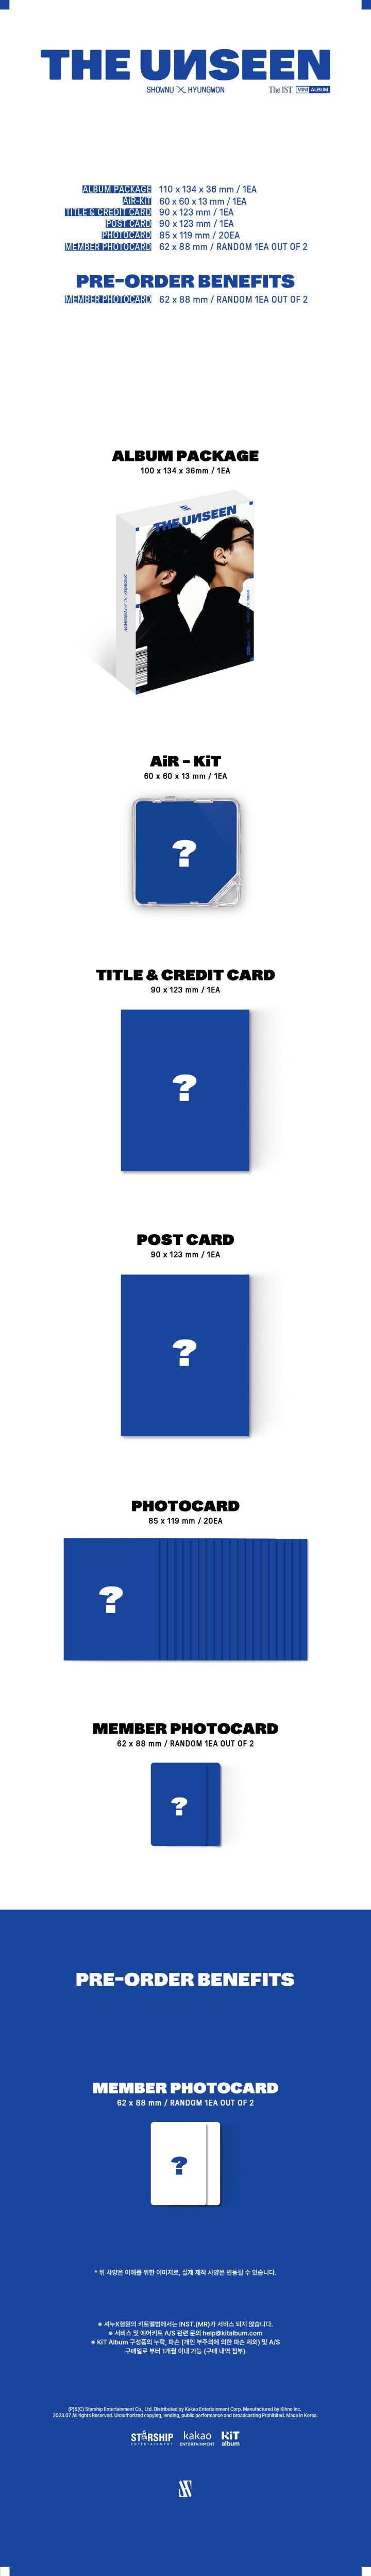 1 Air-KiT
1 Title & Credit Card
1 Postcard
20 Photo Cards
1 Member Photo Card (random out of 2 types)